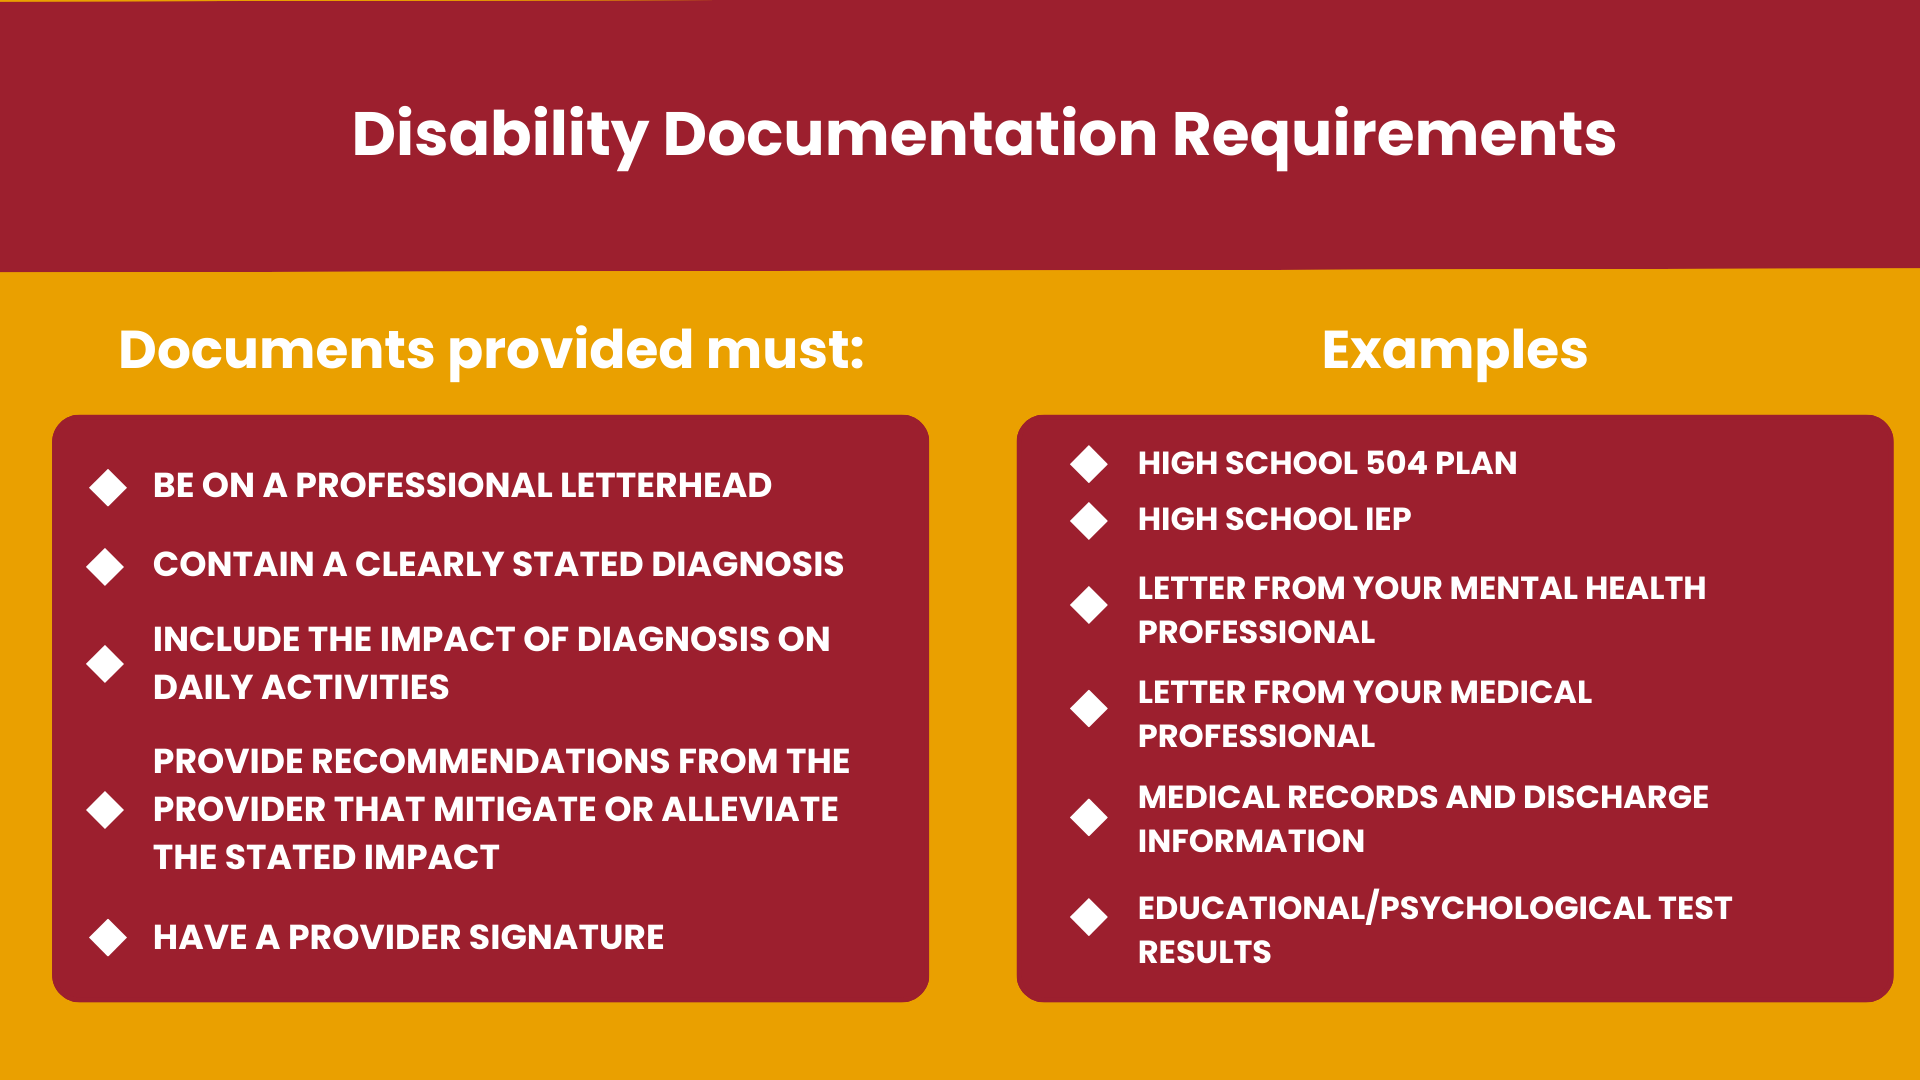 Disability Documentation Requirements 2022